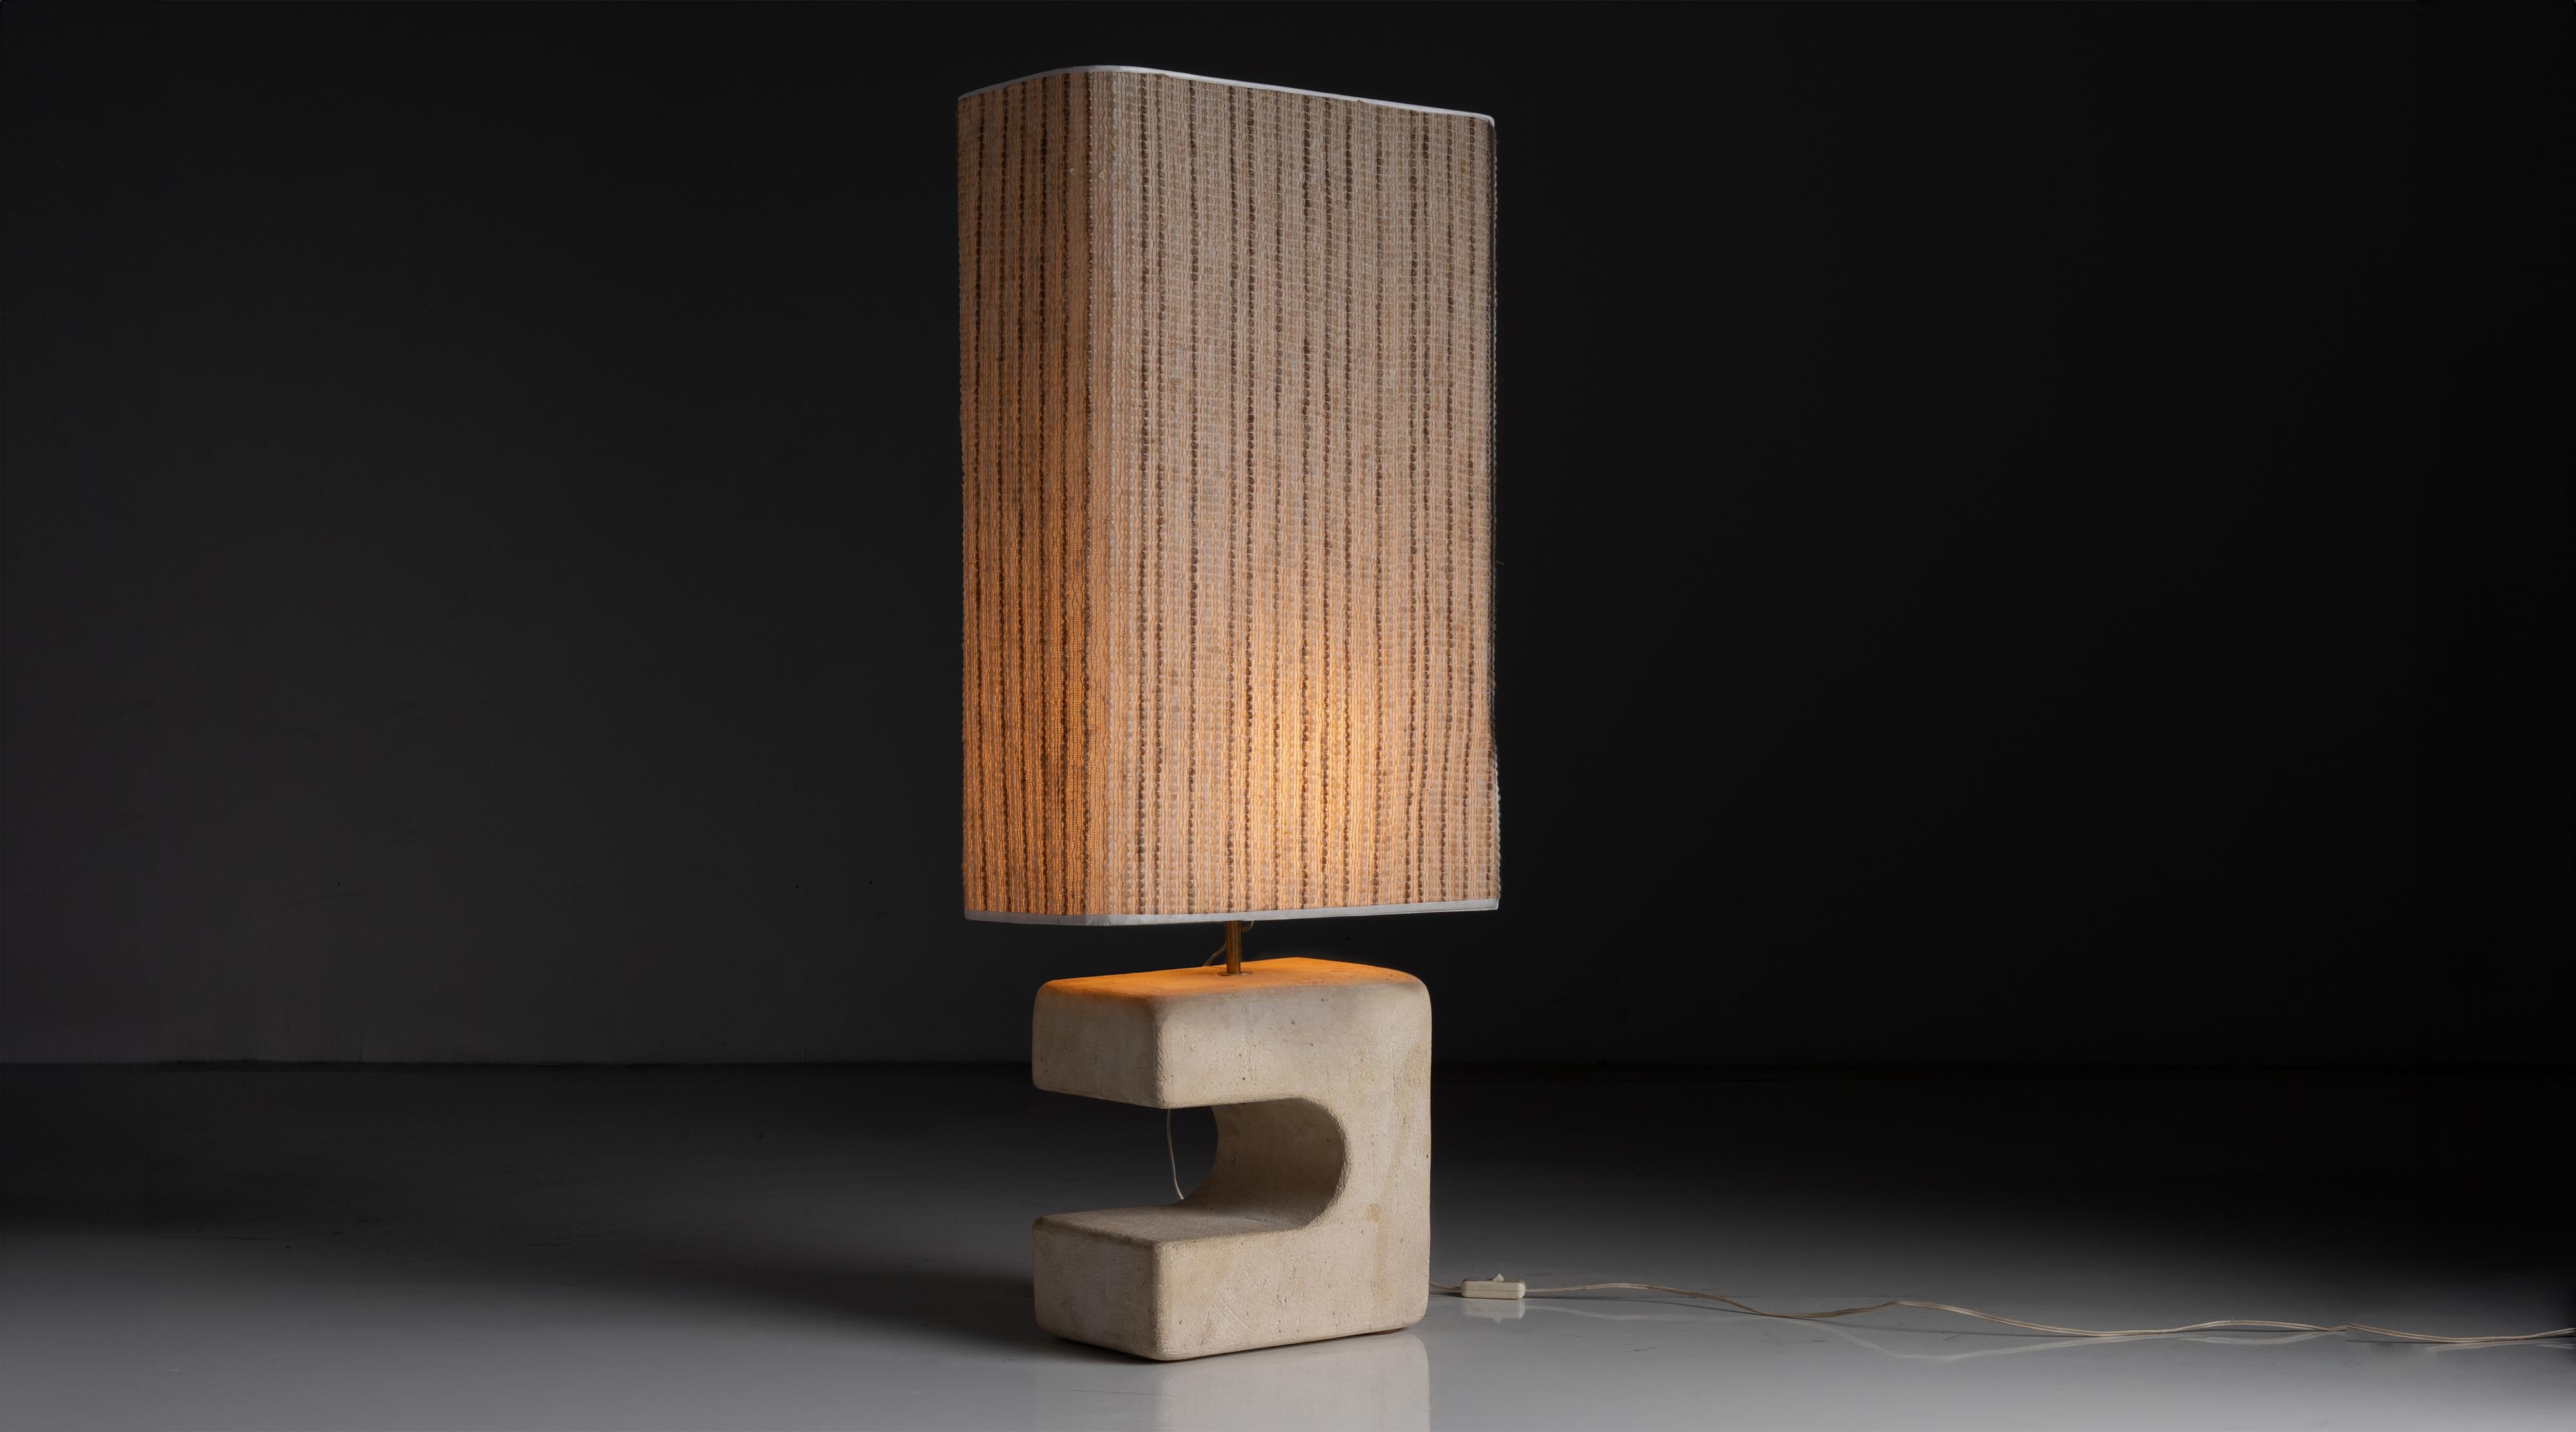 Sculptural Stone Lamp

France circa 1960

Stone lamp base with woven linen shade.

18”w x 9”d x 41”h